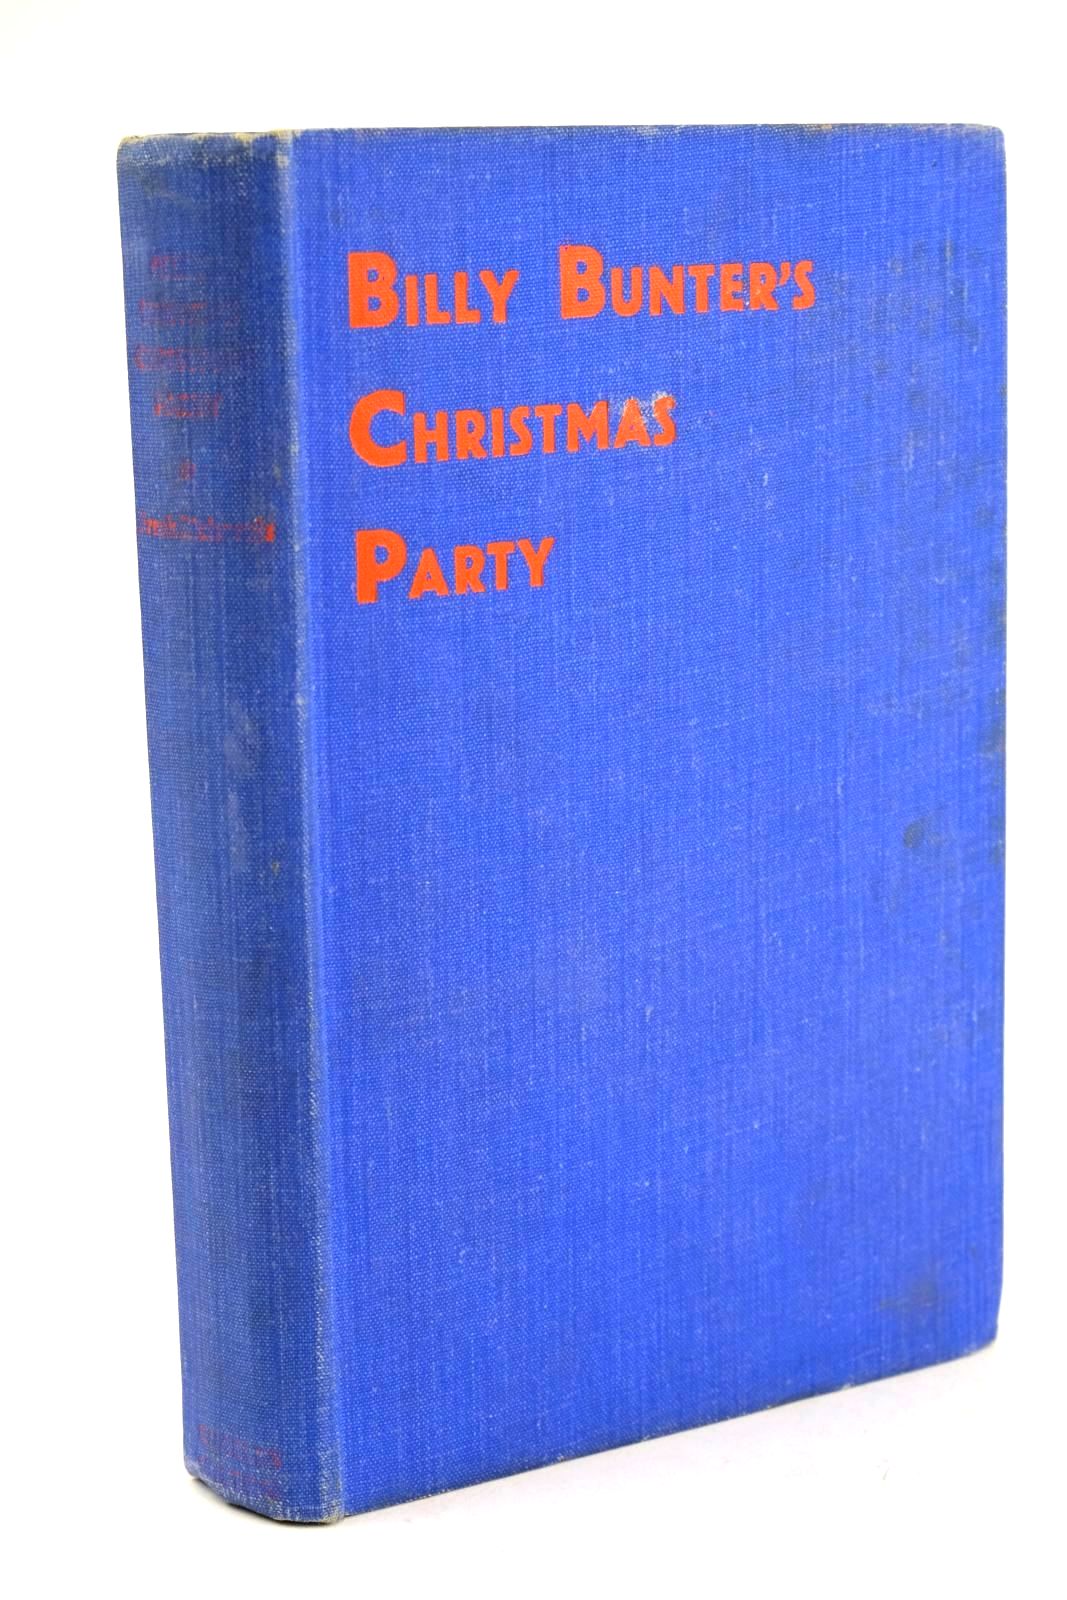 Photo of BILLY BUNTER'S CHRISTMAS PARTY- Stock Number: 1324120